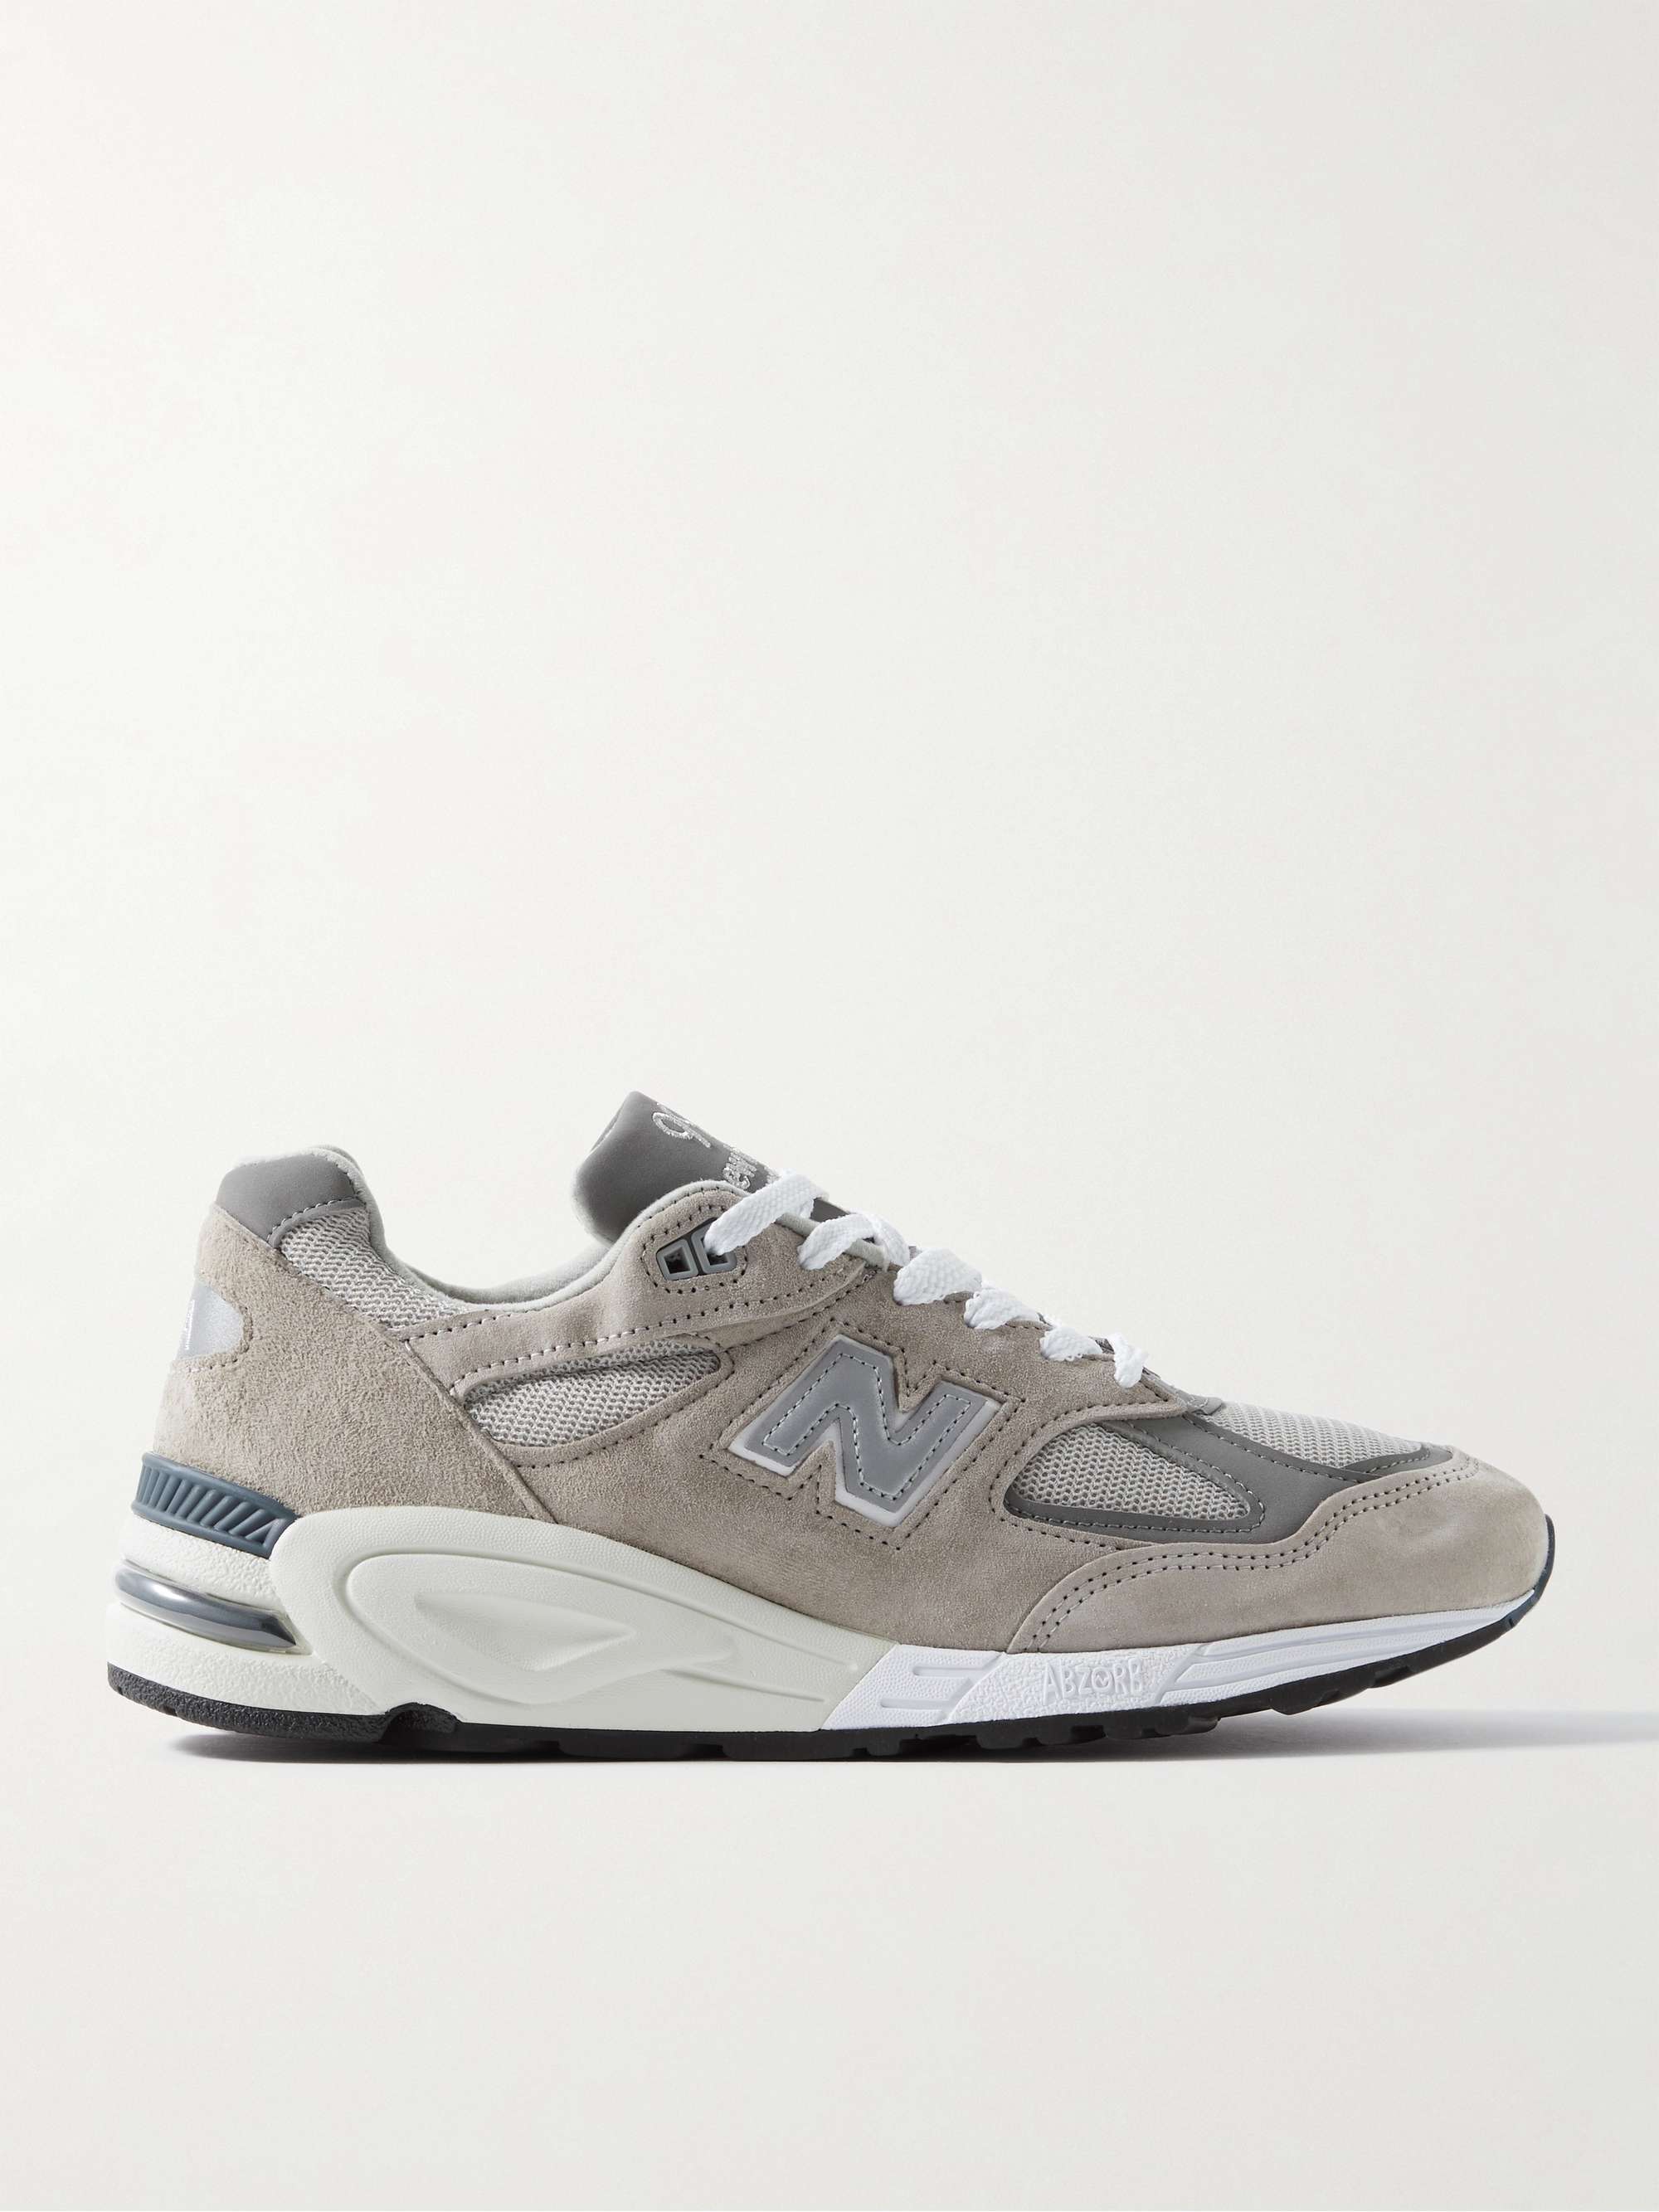 NEW BALANCE M990v2 Suede and Mesh Sneakers